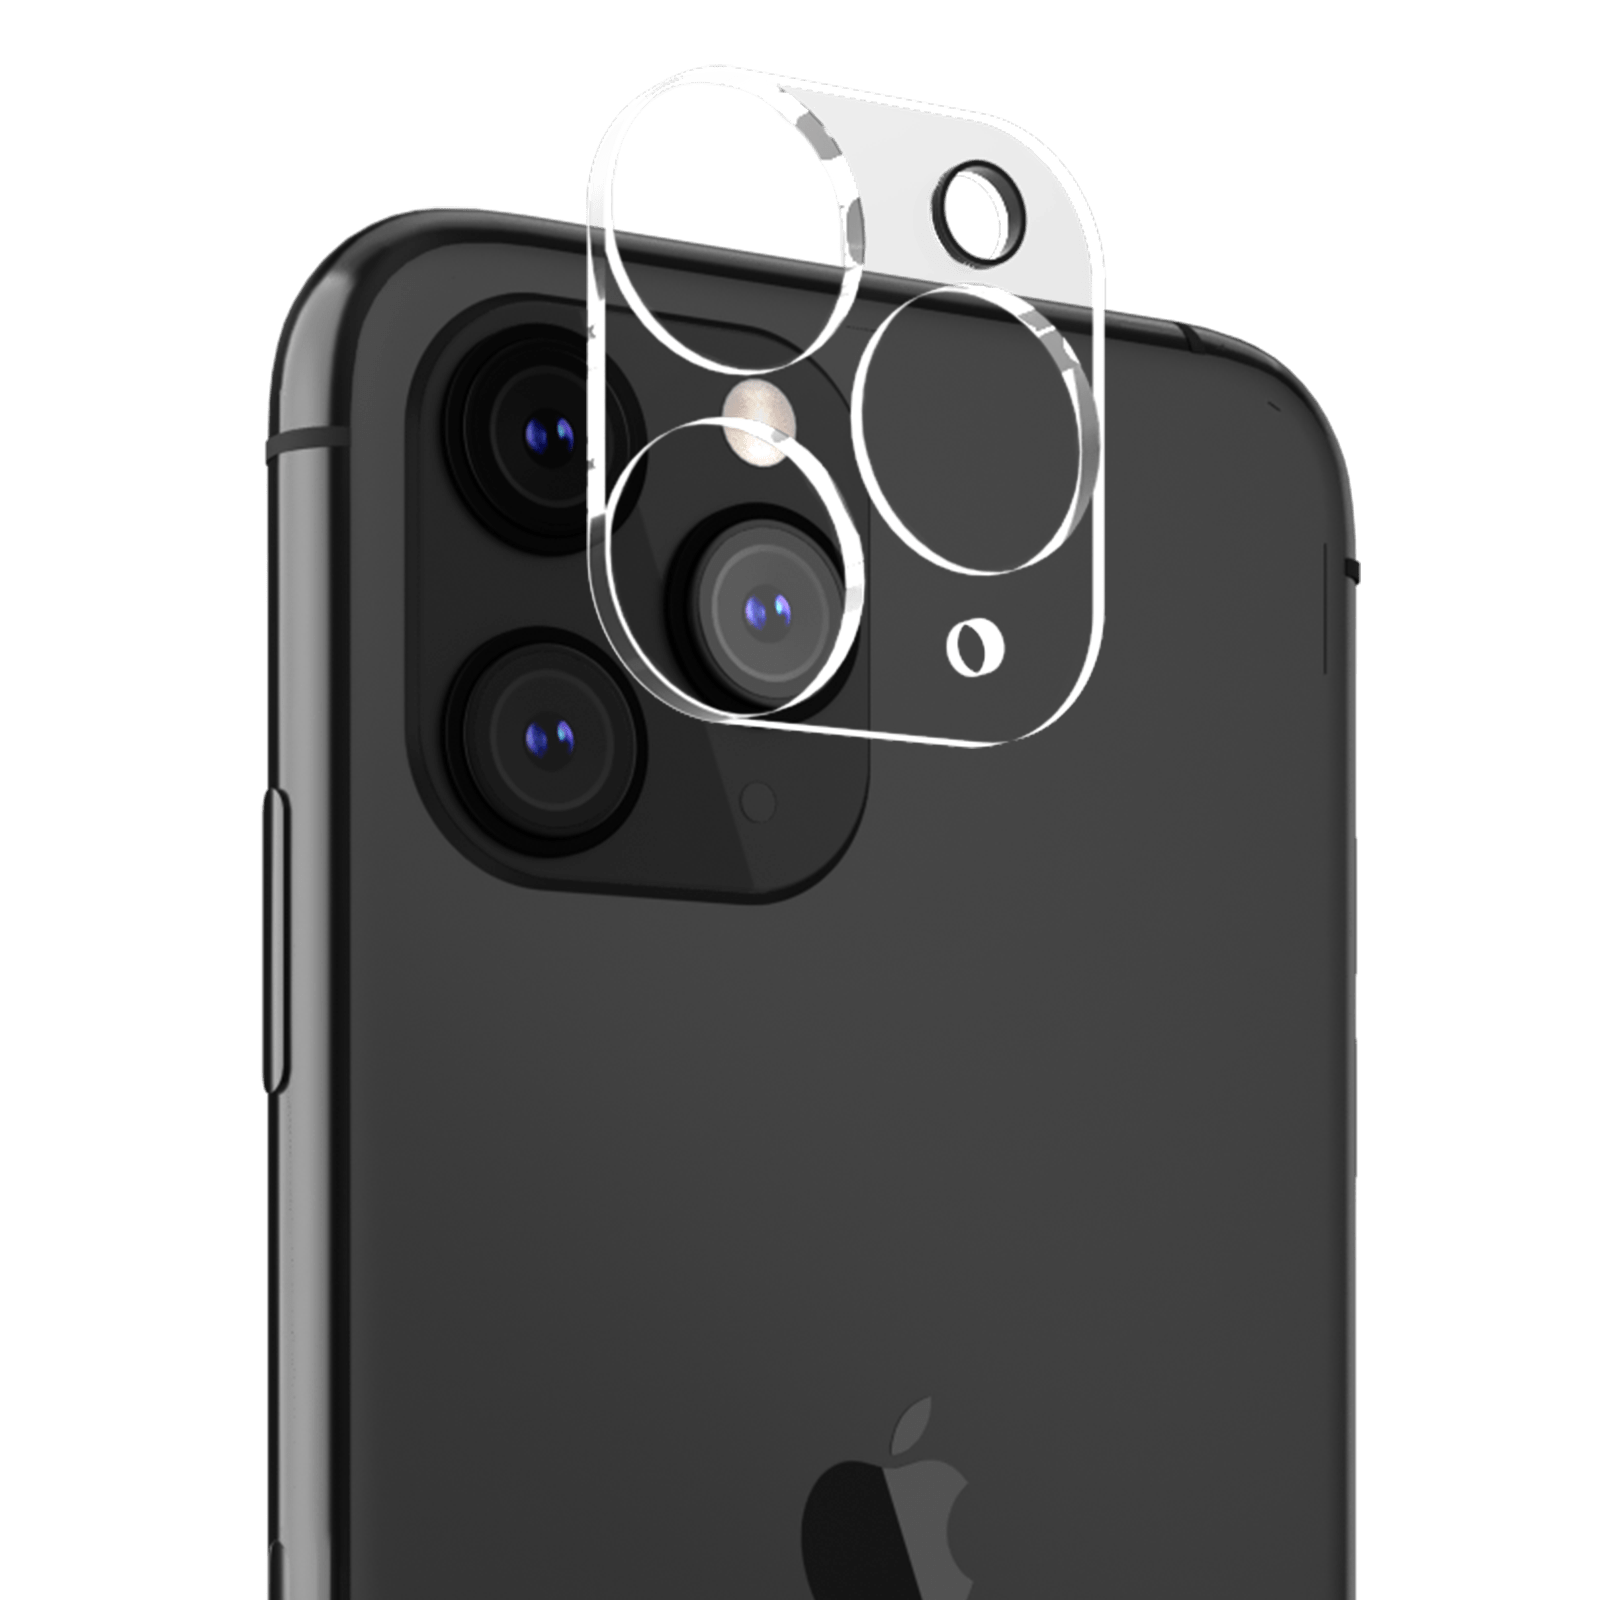 Camera Lens Protector for iPhone 11